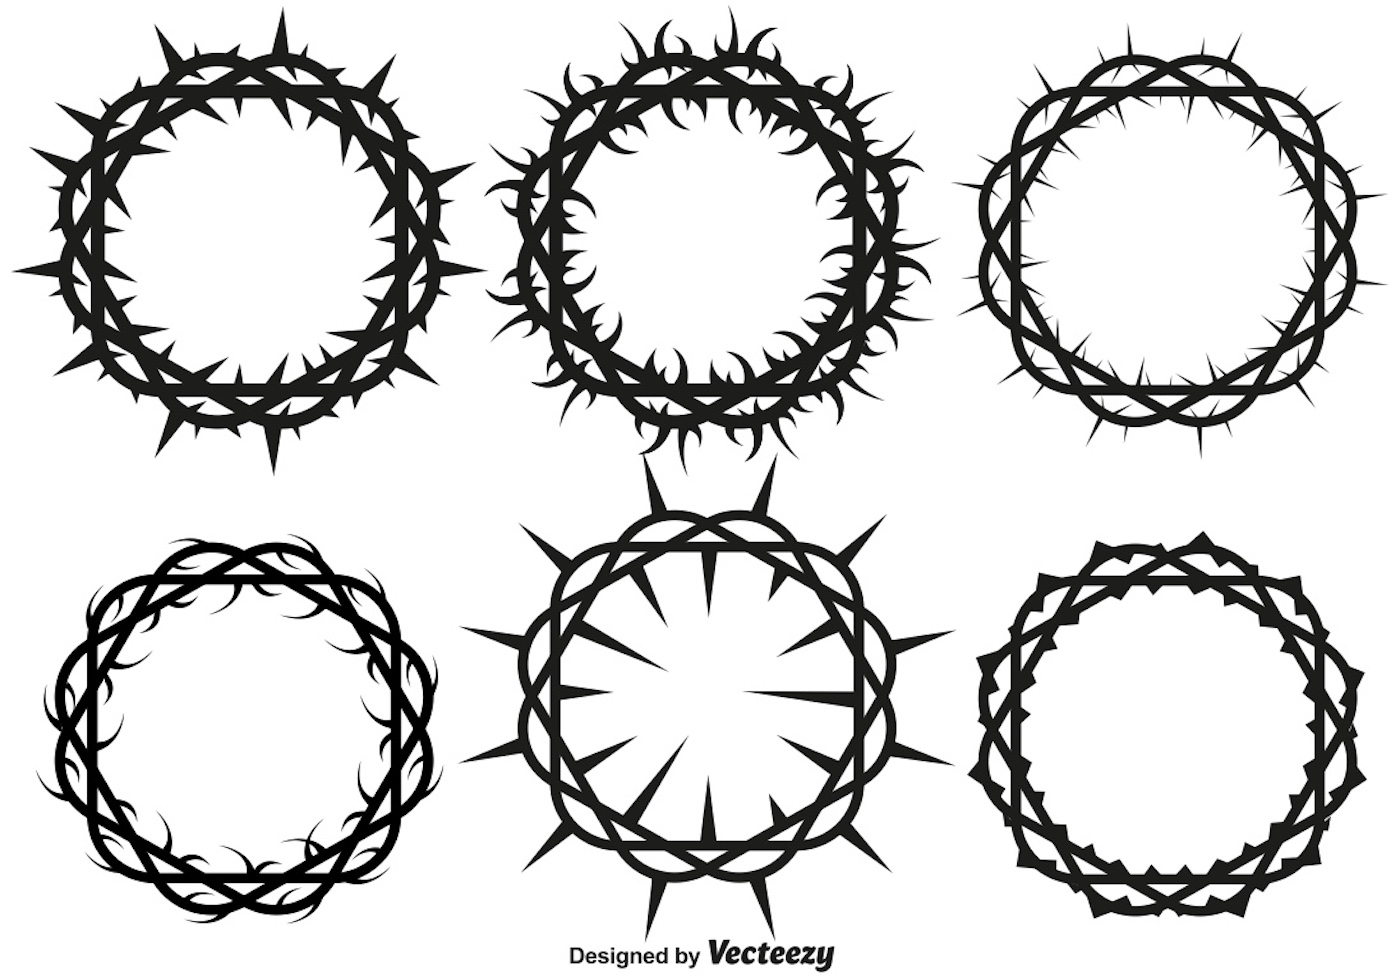 Download Vector Crown Of Thorns Set For Lent And Easter 159448 ...